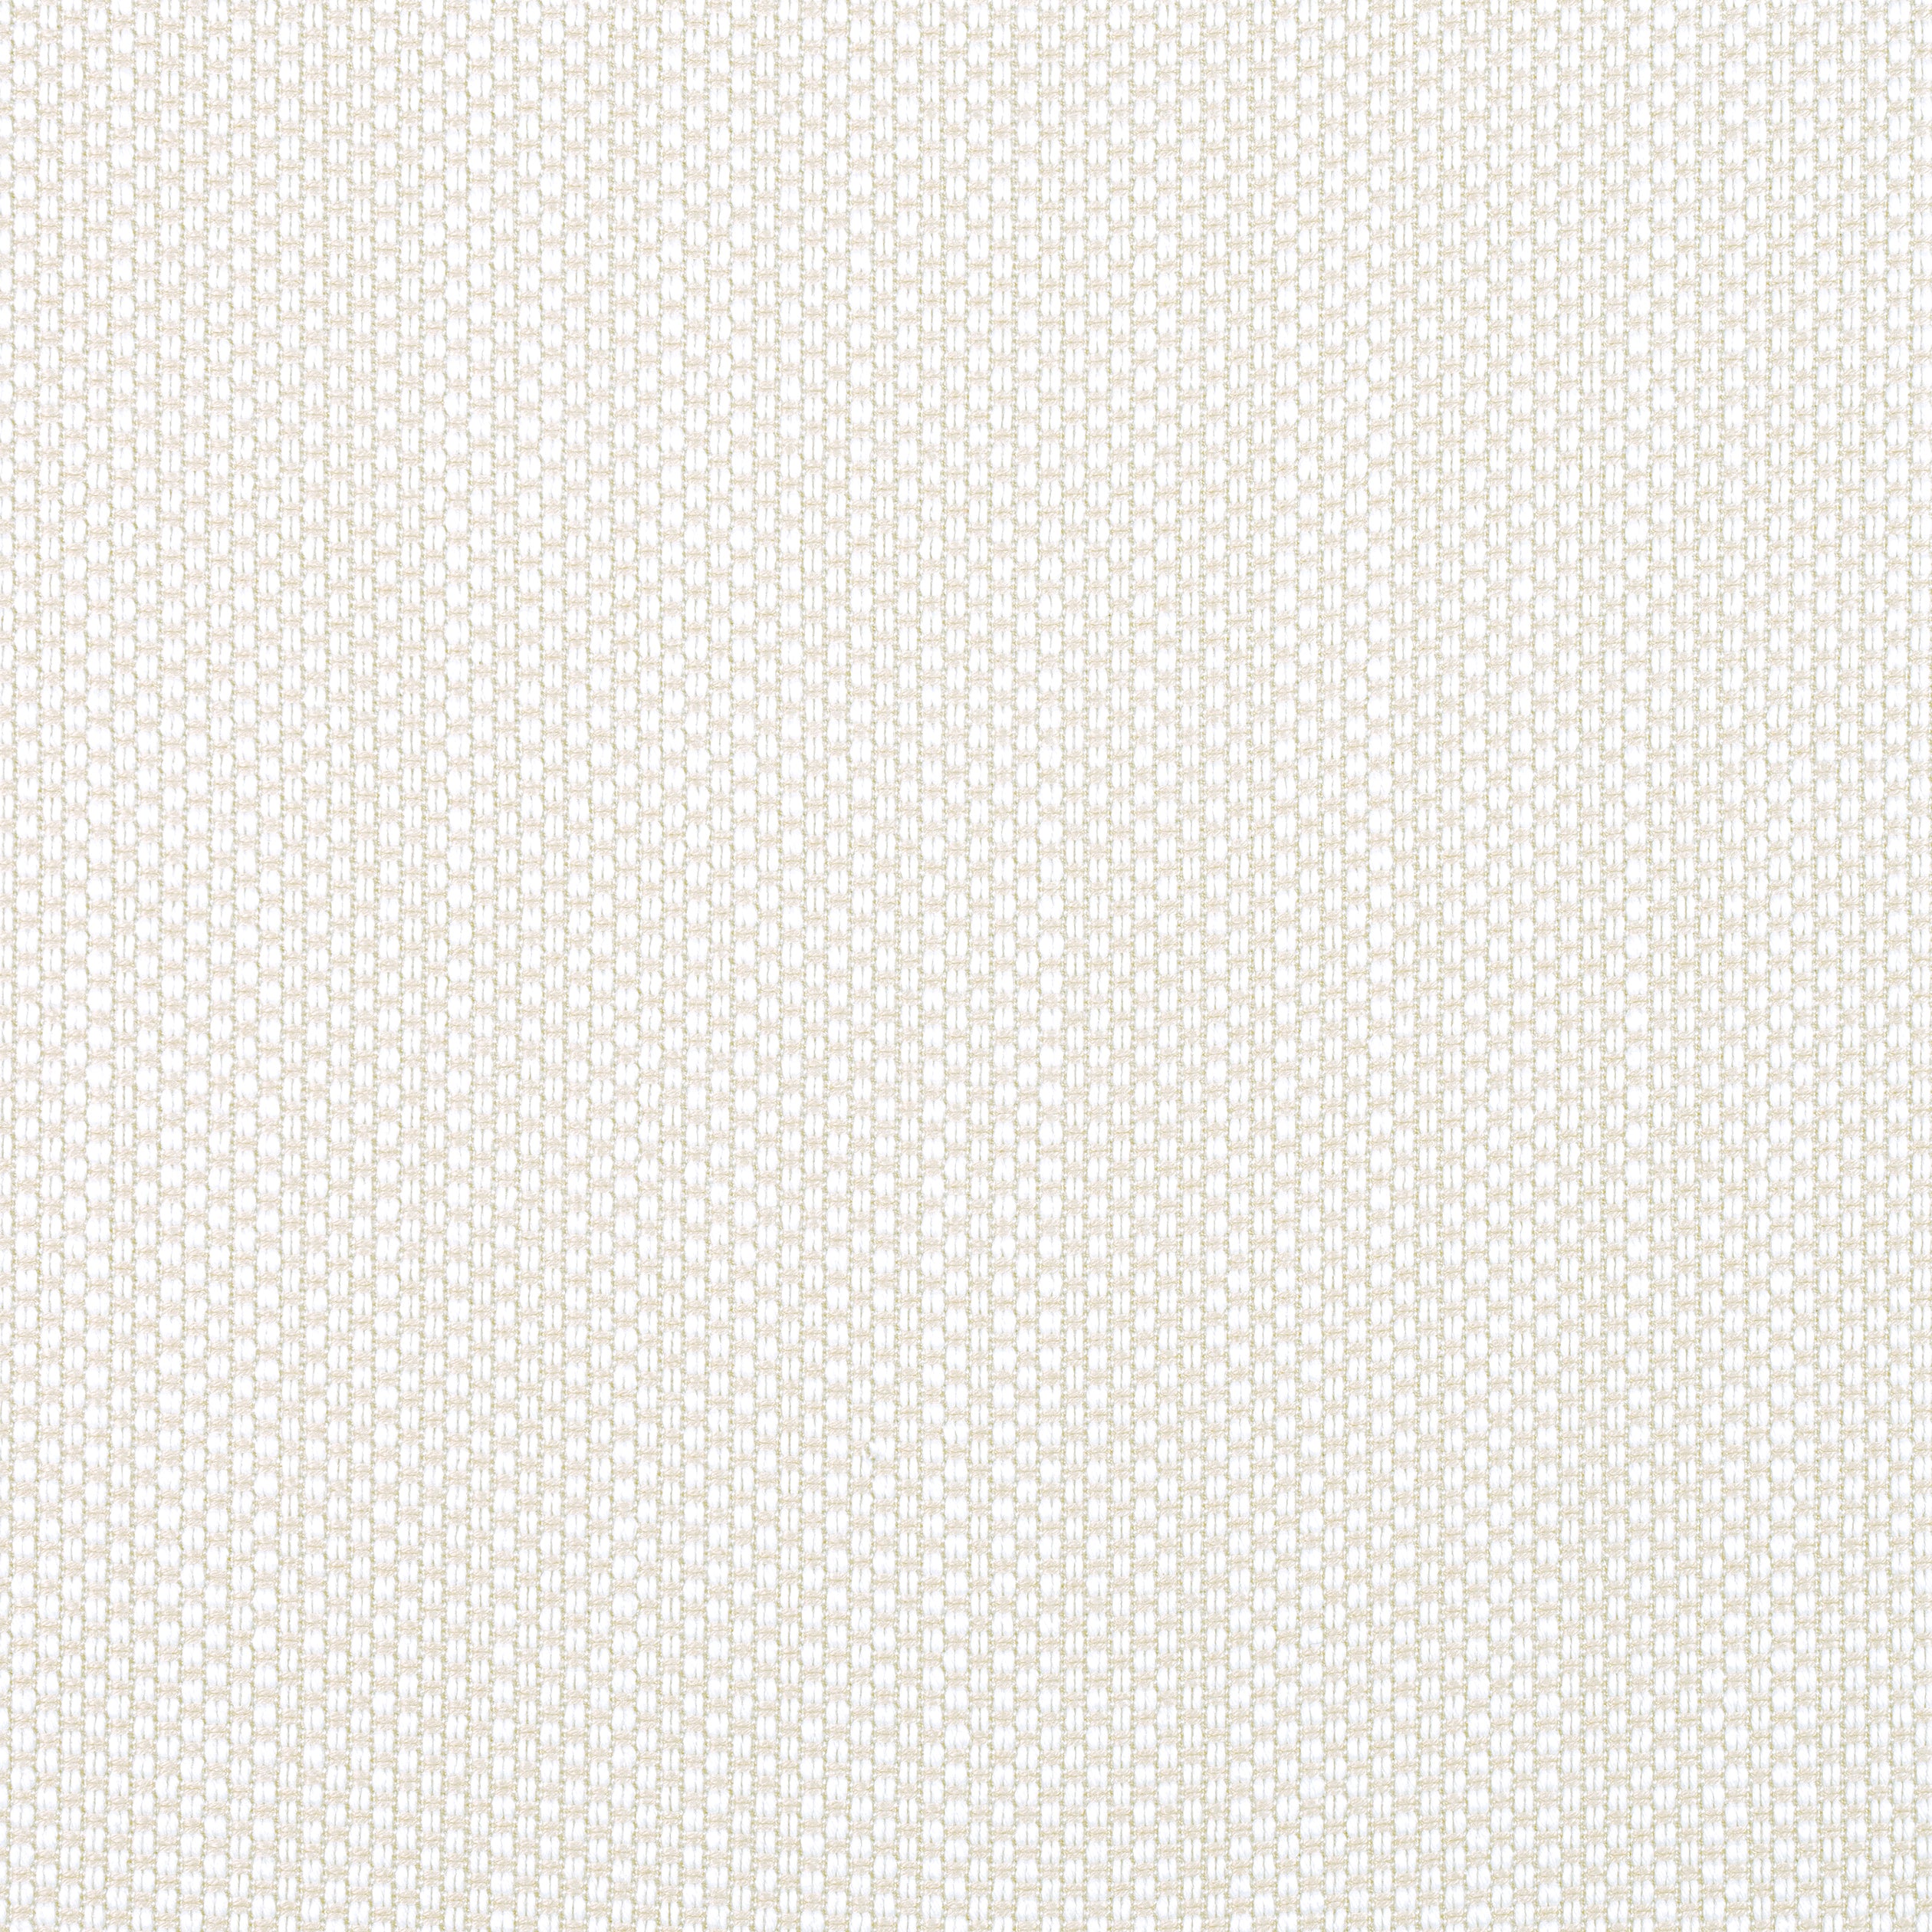 Ravenna fabric in sand color - pattern number W8614 - by Thibaut in the Villa Textures collection